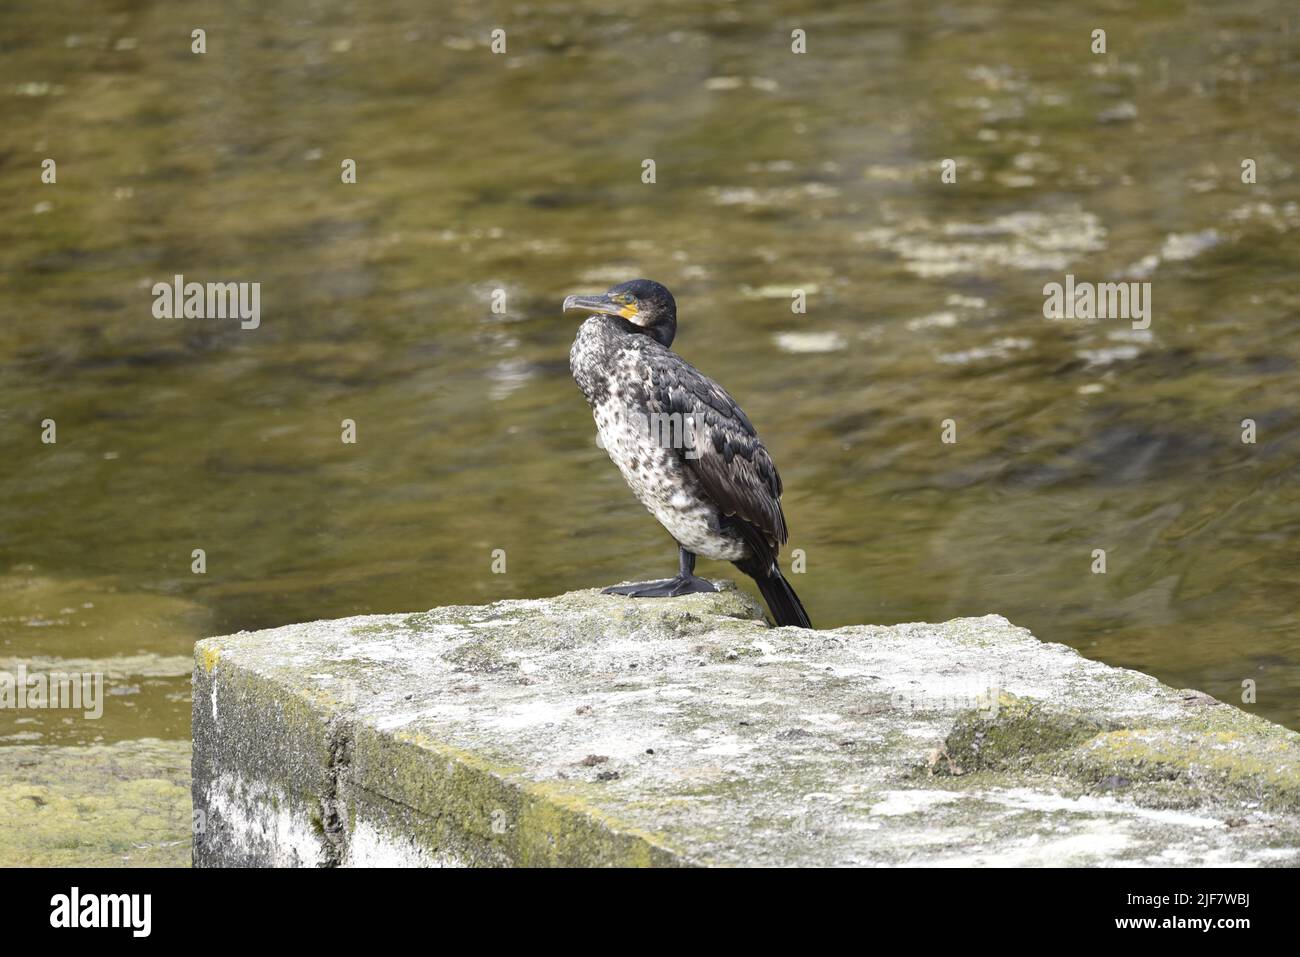 Immature Great Cormorant (Phalacrocorax carbo) Perched in Left-Profile on the Edge of a Concrete Platform on a Lake in the Sun with Wings Closed, UK Stock Photo